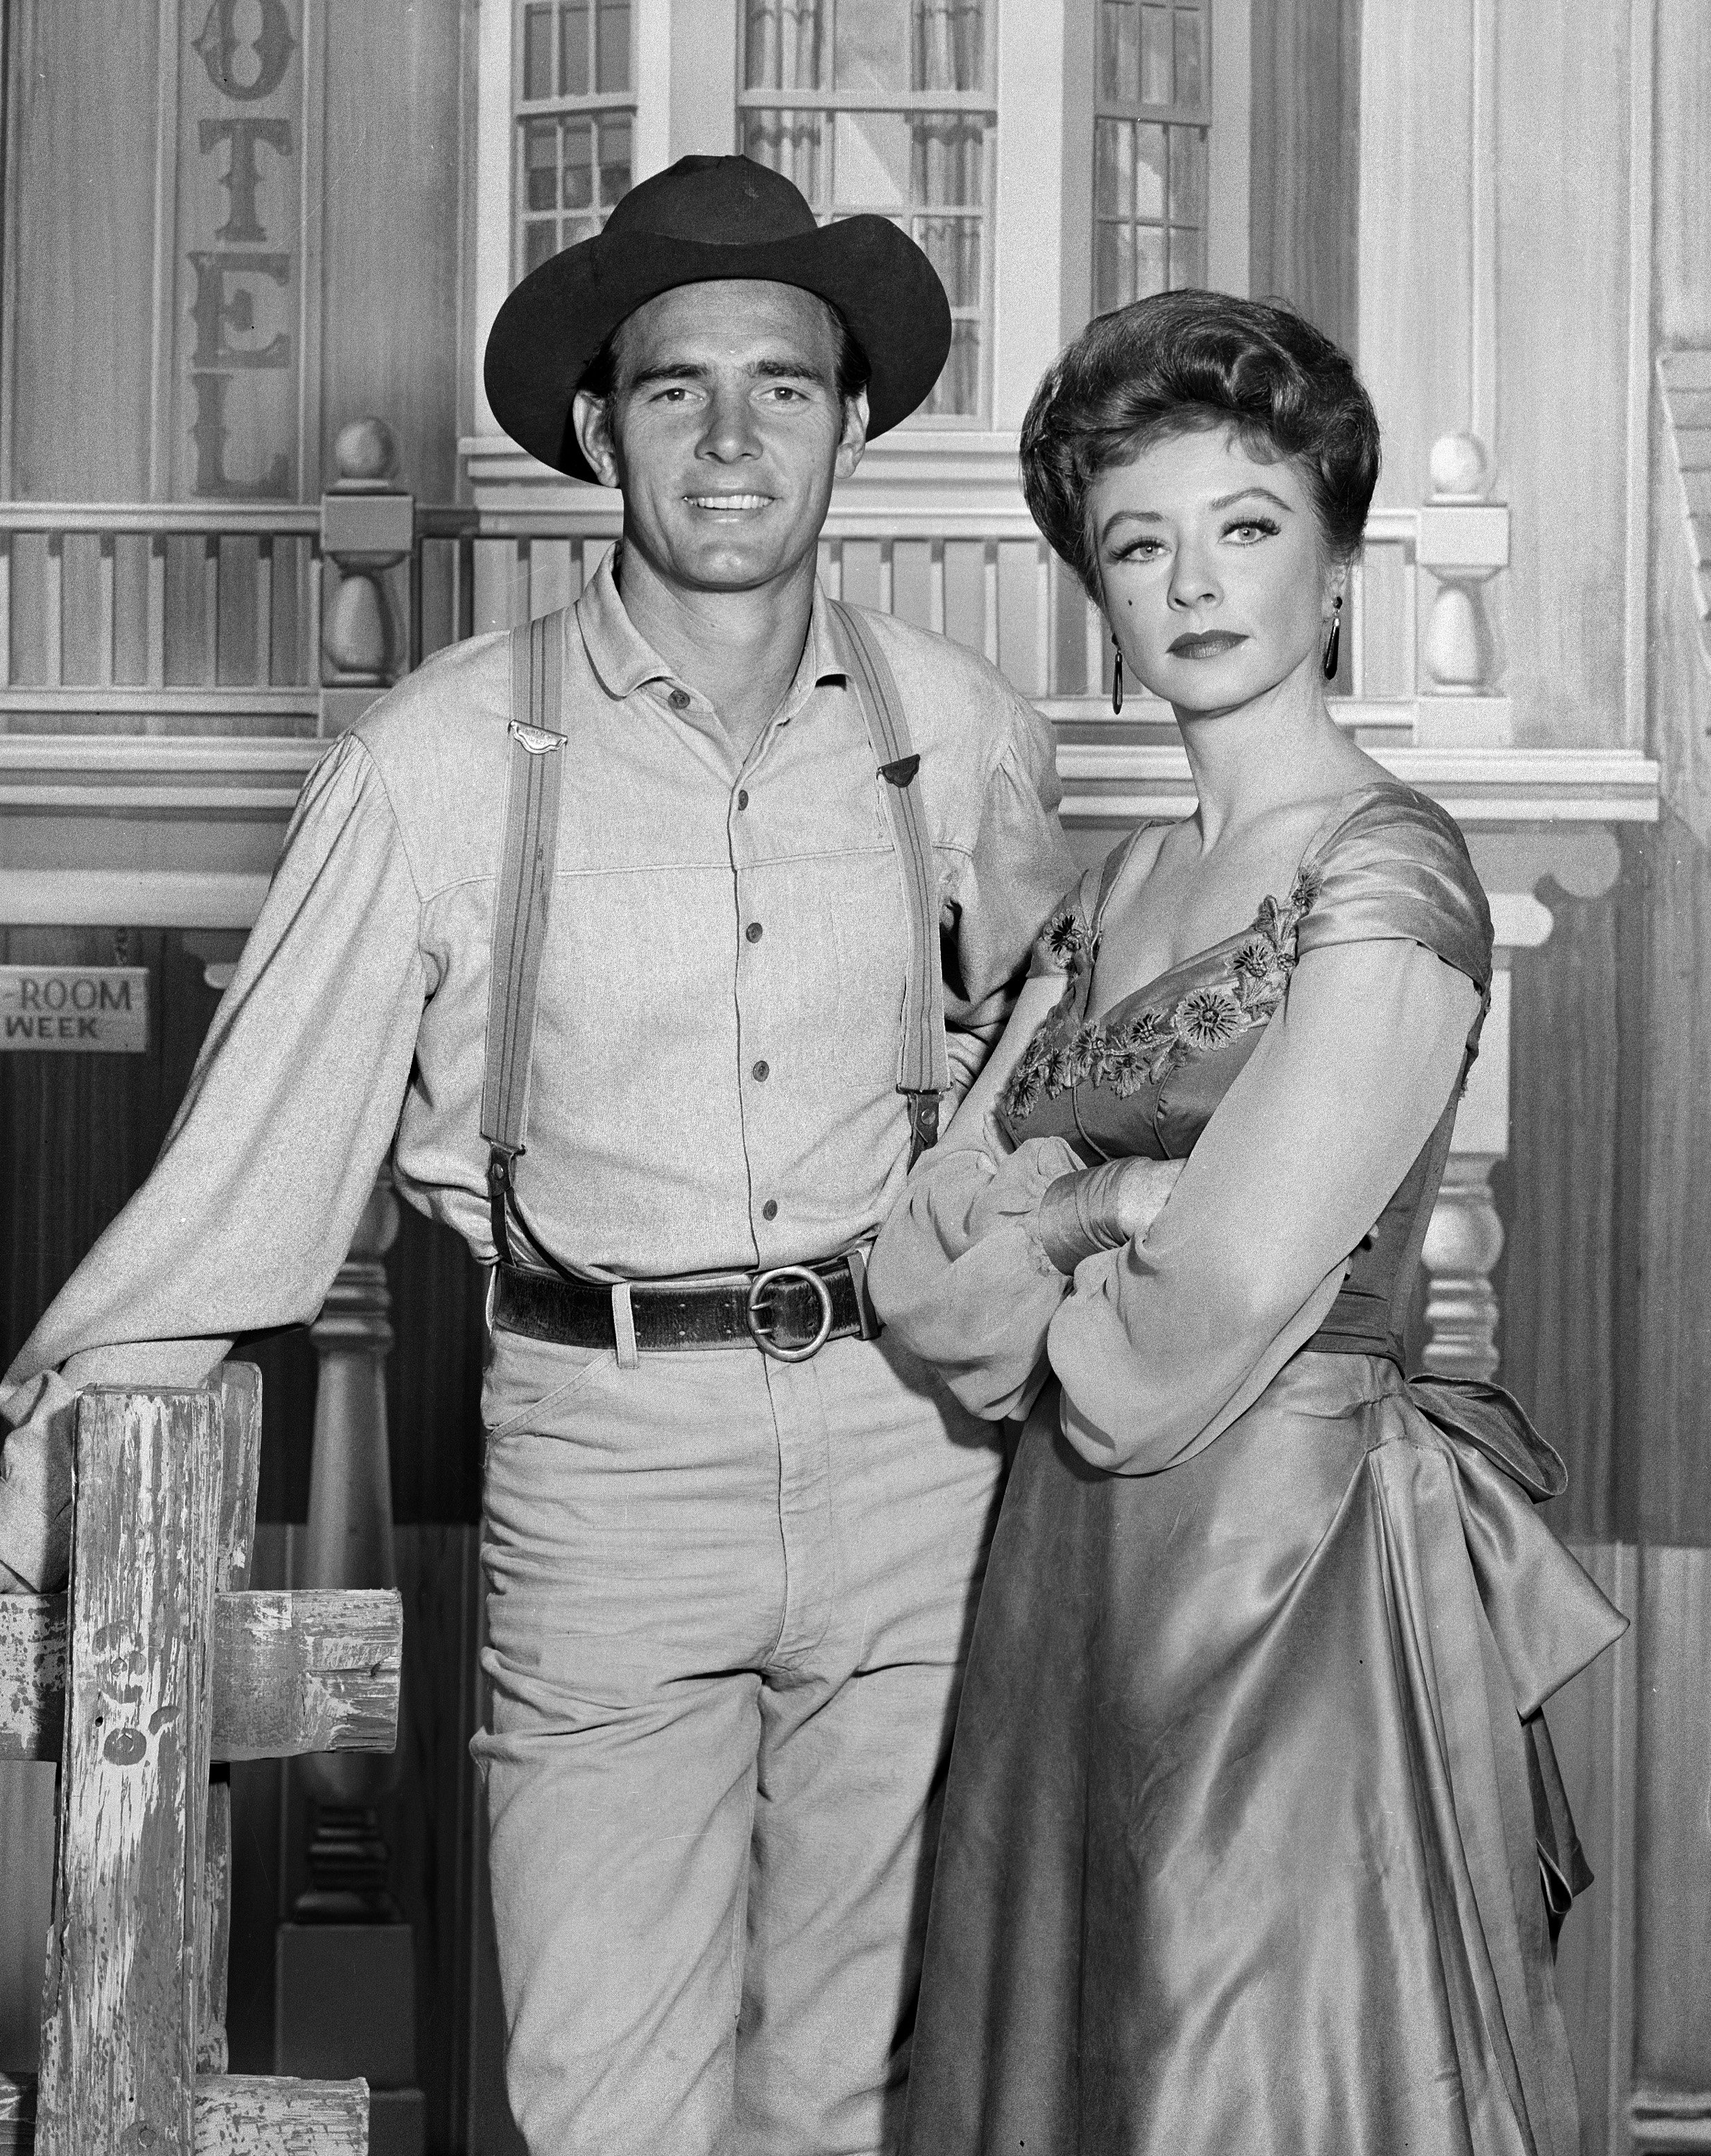 Dennis Weaver as Chester Goode, Amanda Blake as Kitty Russell in the series "Gunsmoke" pictured on May 27, 1960. / Source: Getty Images